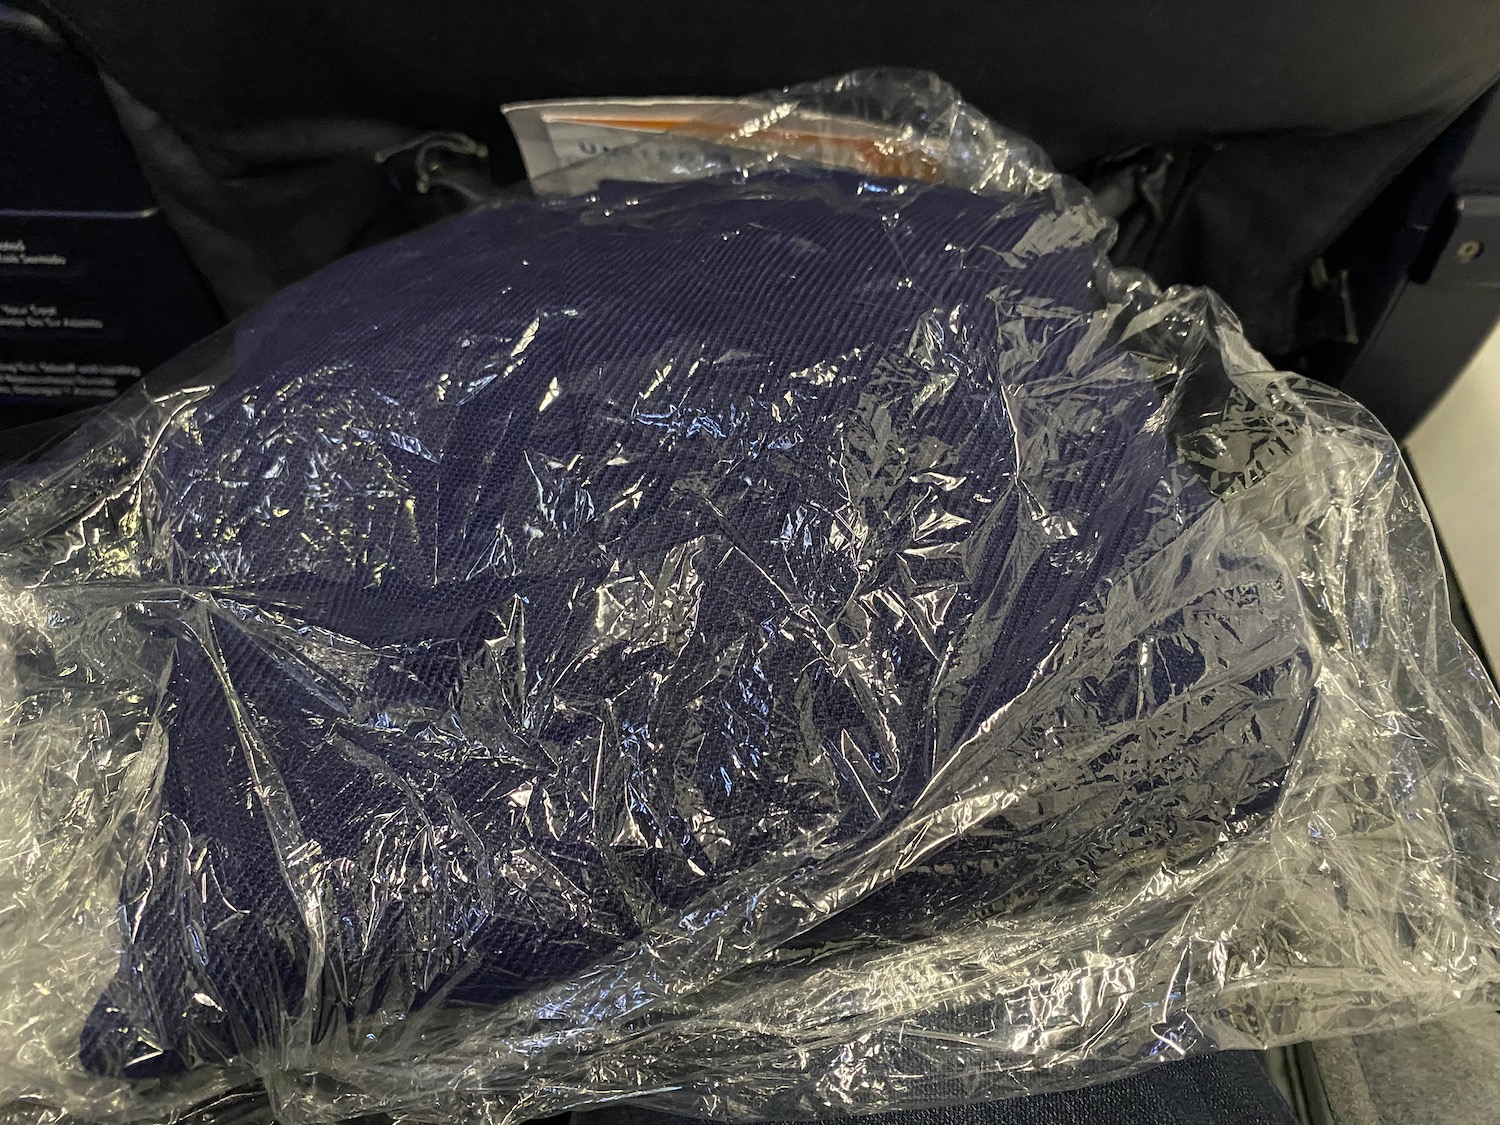 a blue object in a plastic bag